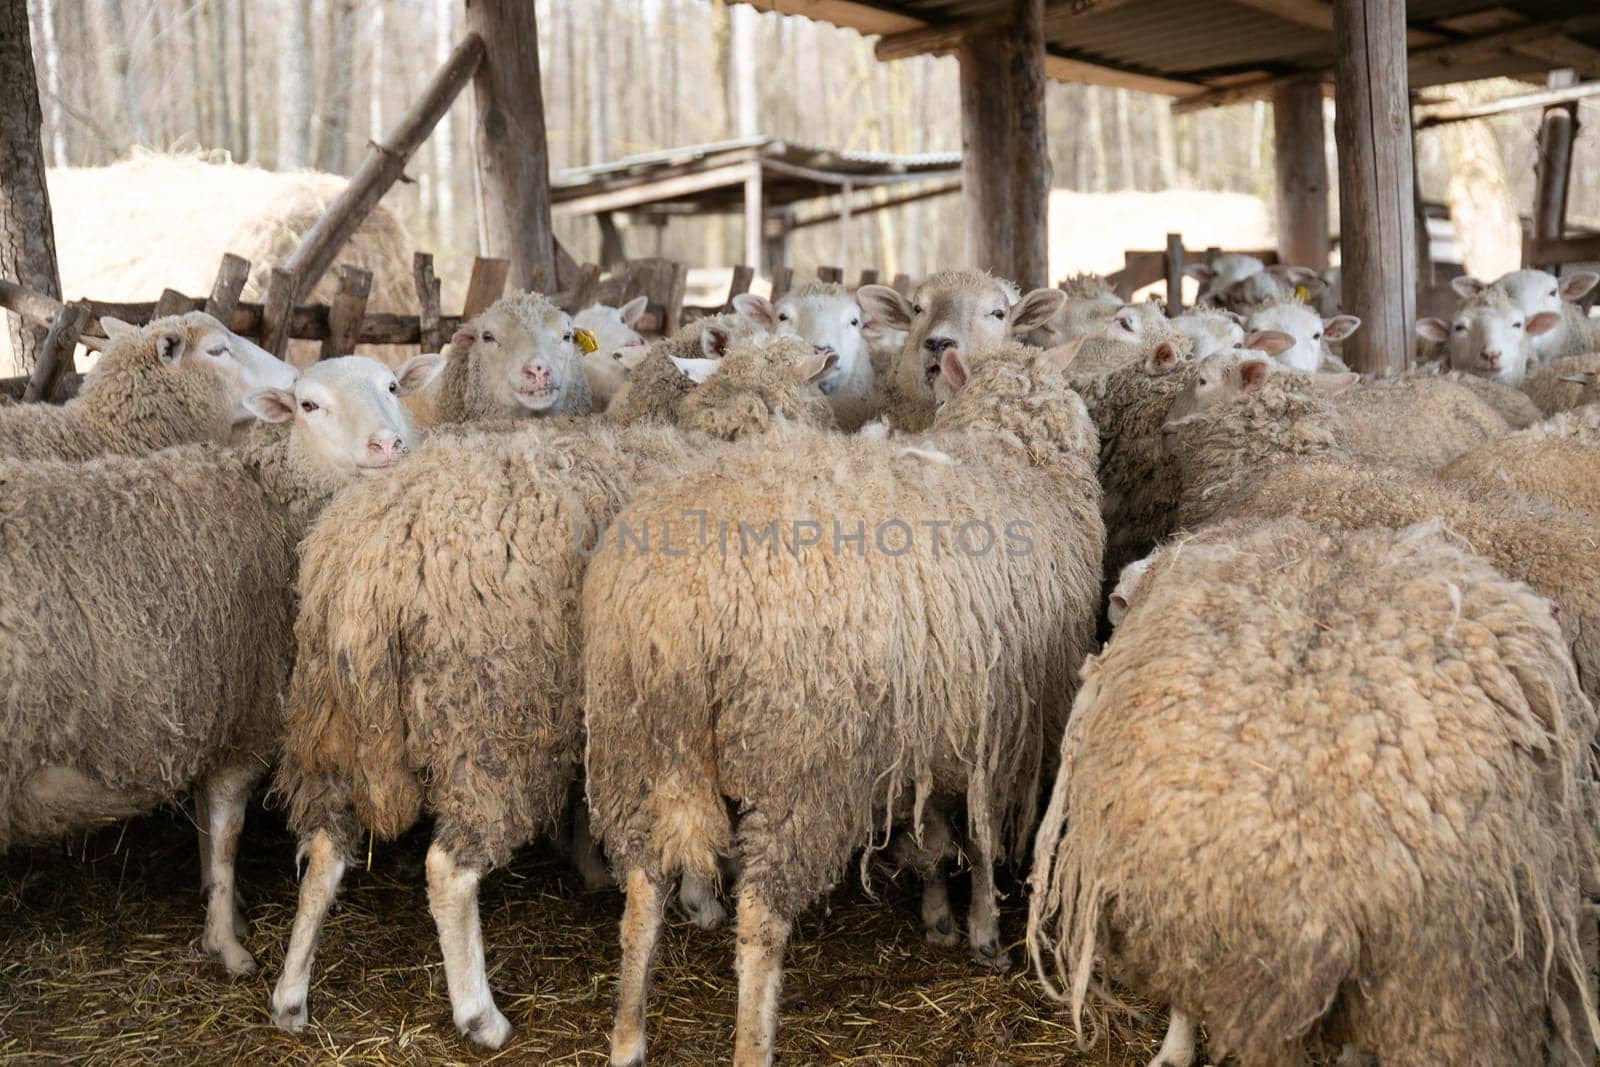 A group of sheep are clustered closely together, standing side by side in a field. The sheep are white and fluffy, with some grazing while others look around. The herd appears calm and unified in their positioning.